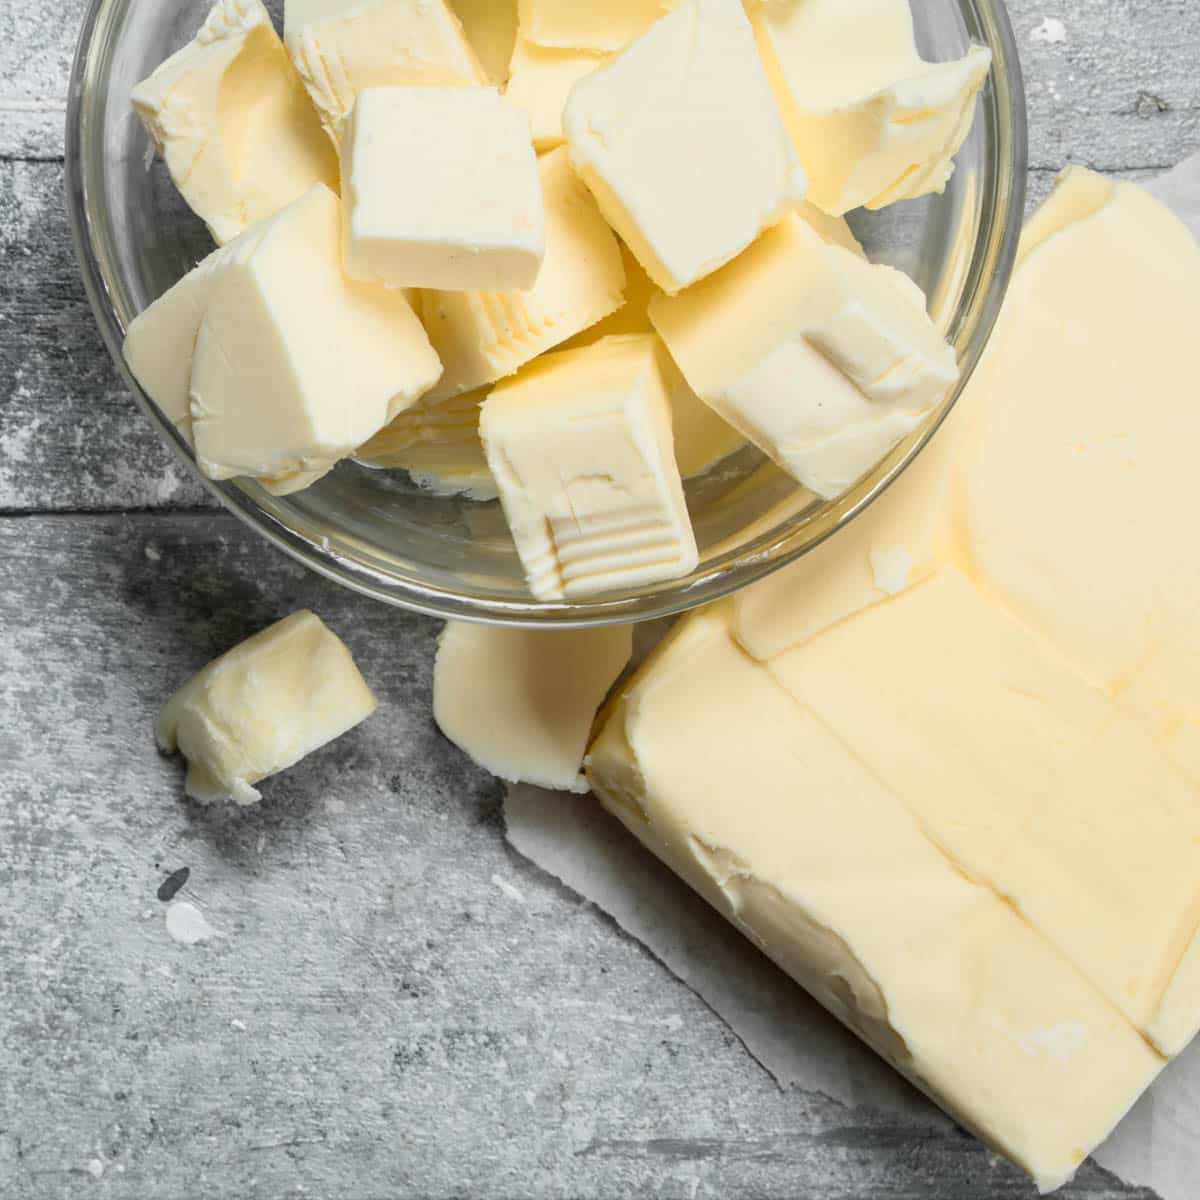 Block of butter next to a glass bowl with cubed butter